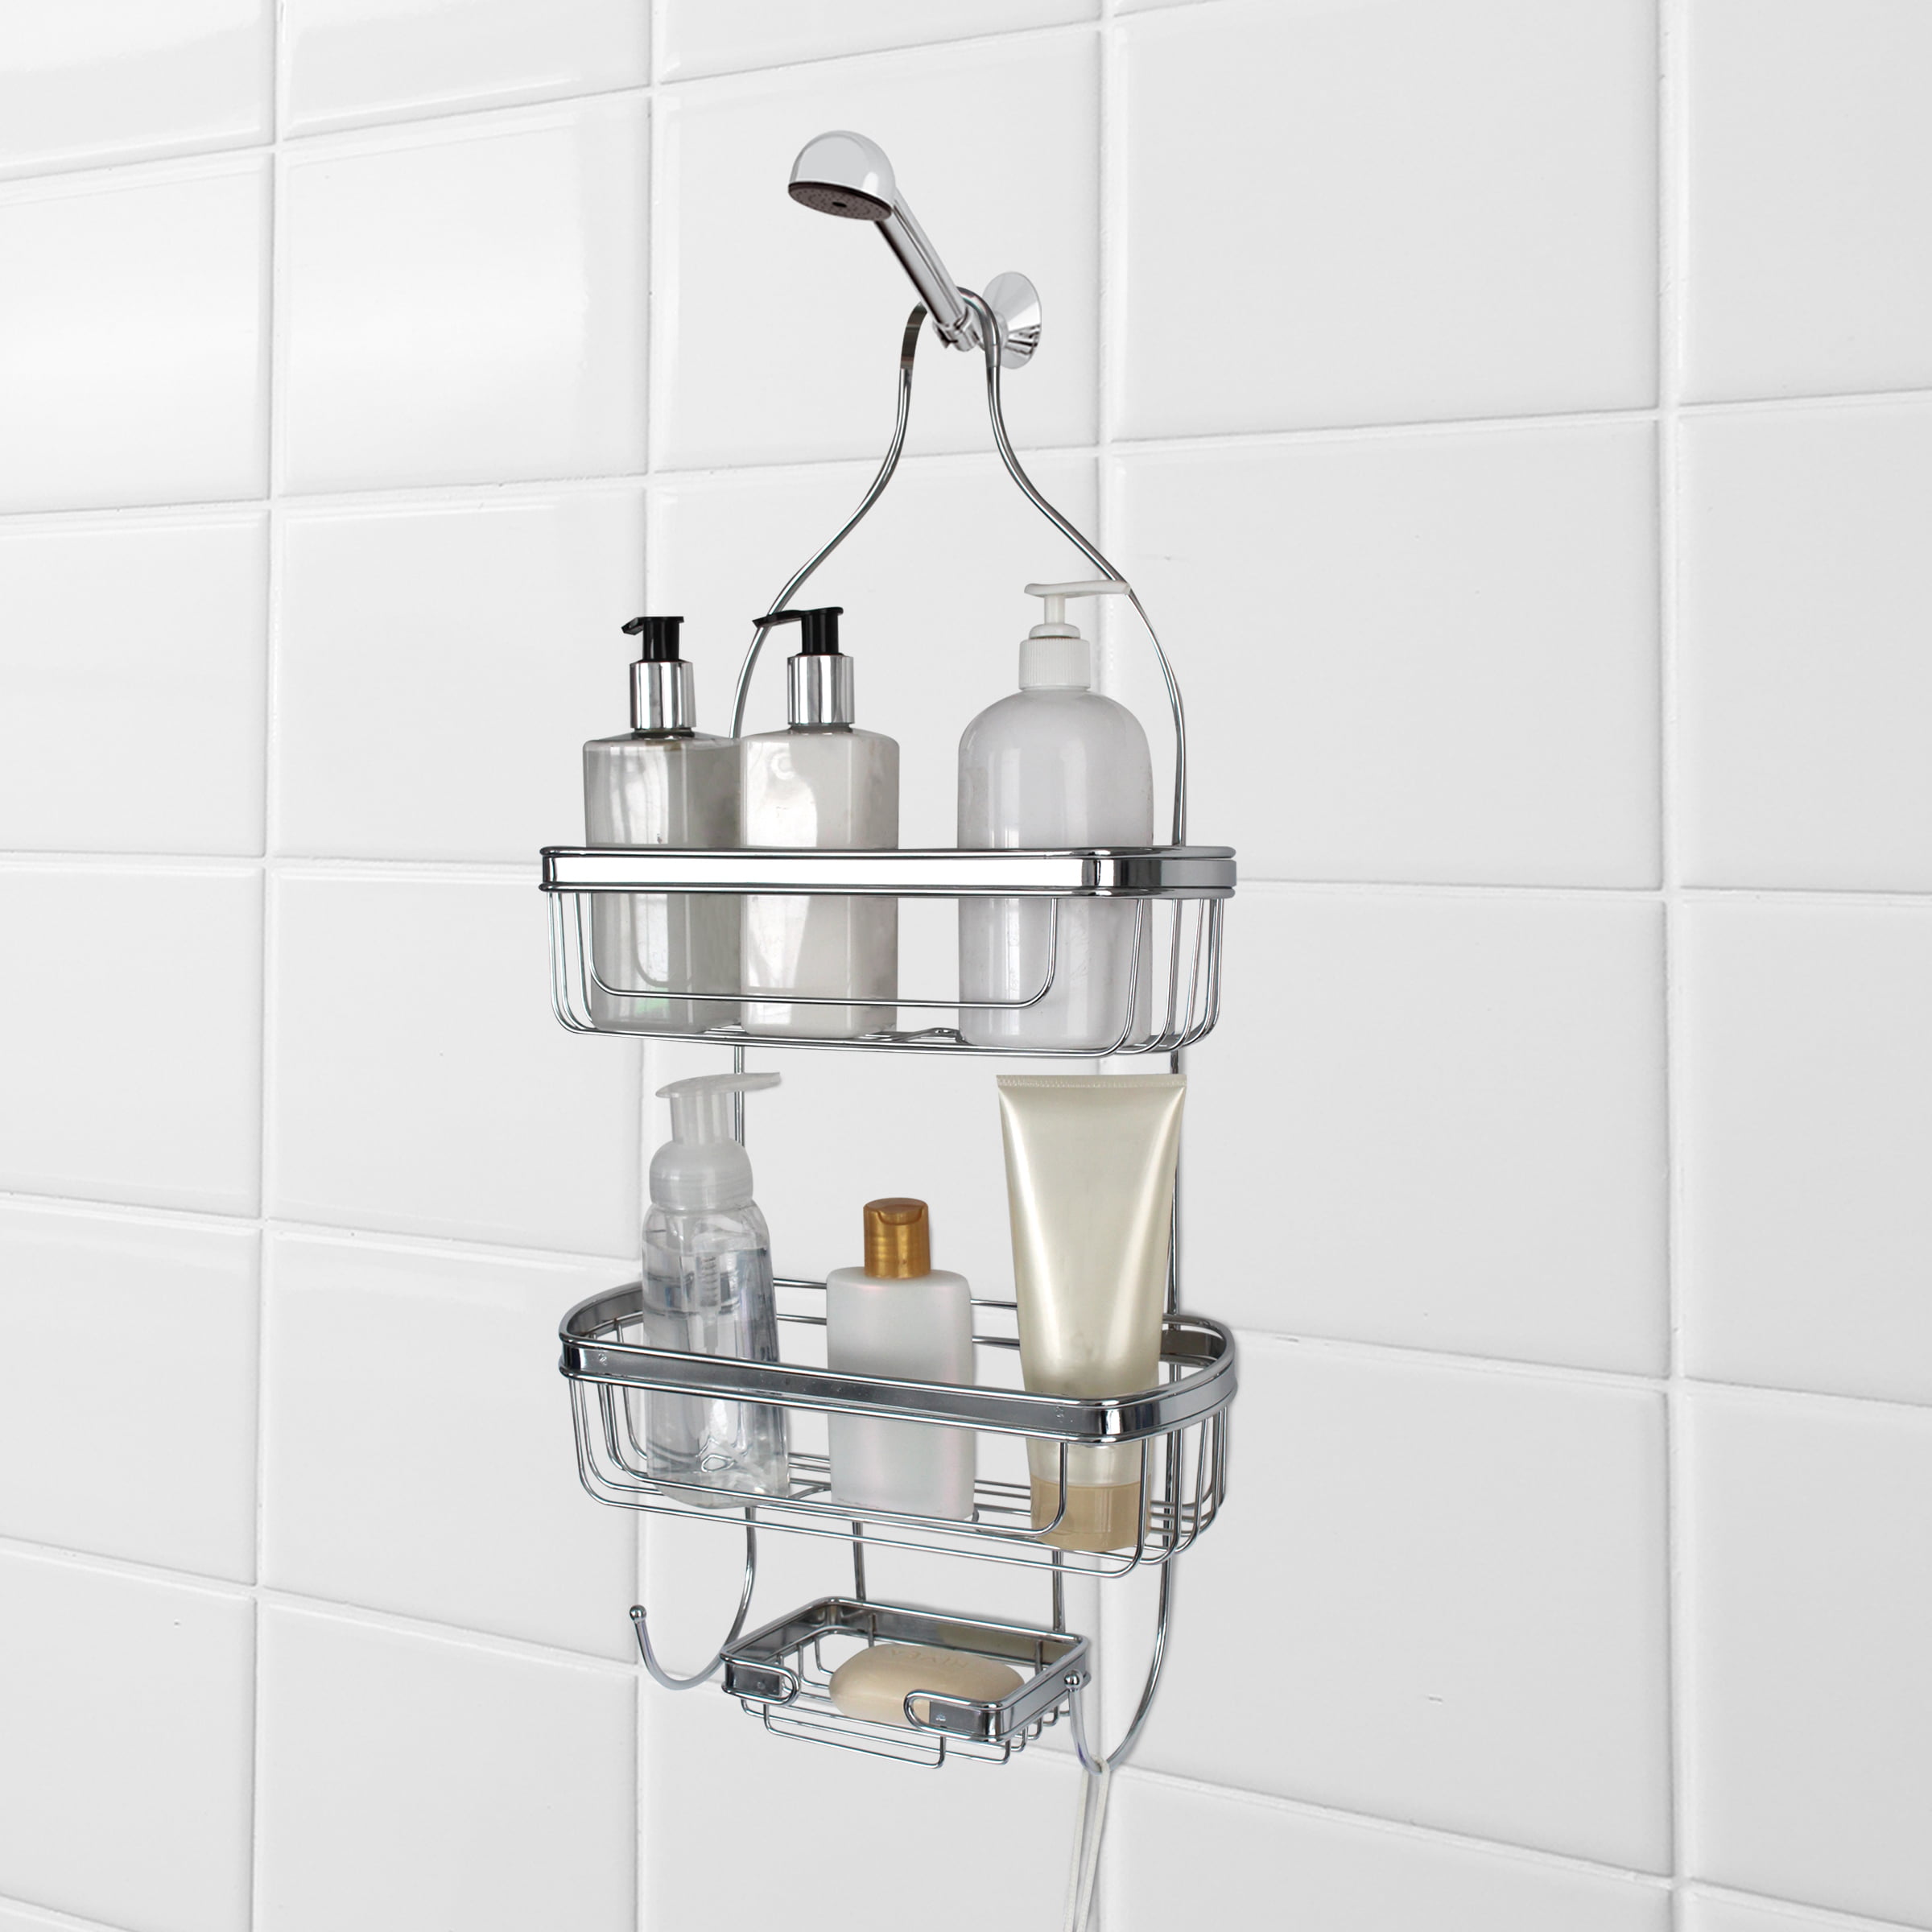 The Plumber's Choice Shower Caddy Over Shower Head Basket Shelf with Hooks Hanging Sponge Shampoo Holder Organizer Stainless Steel in Chrome